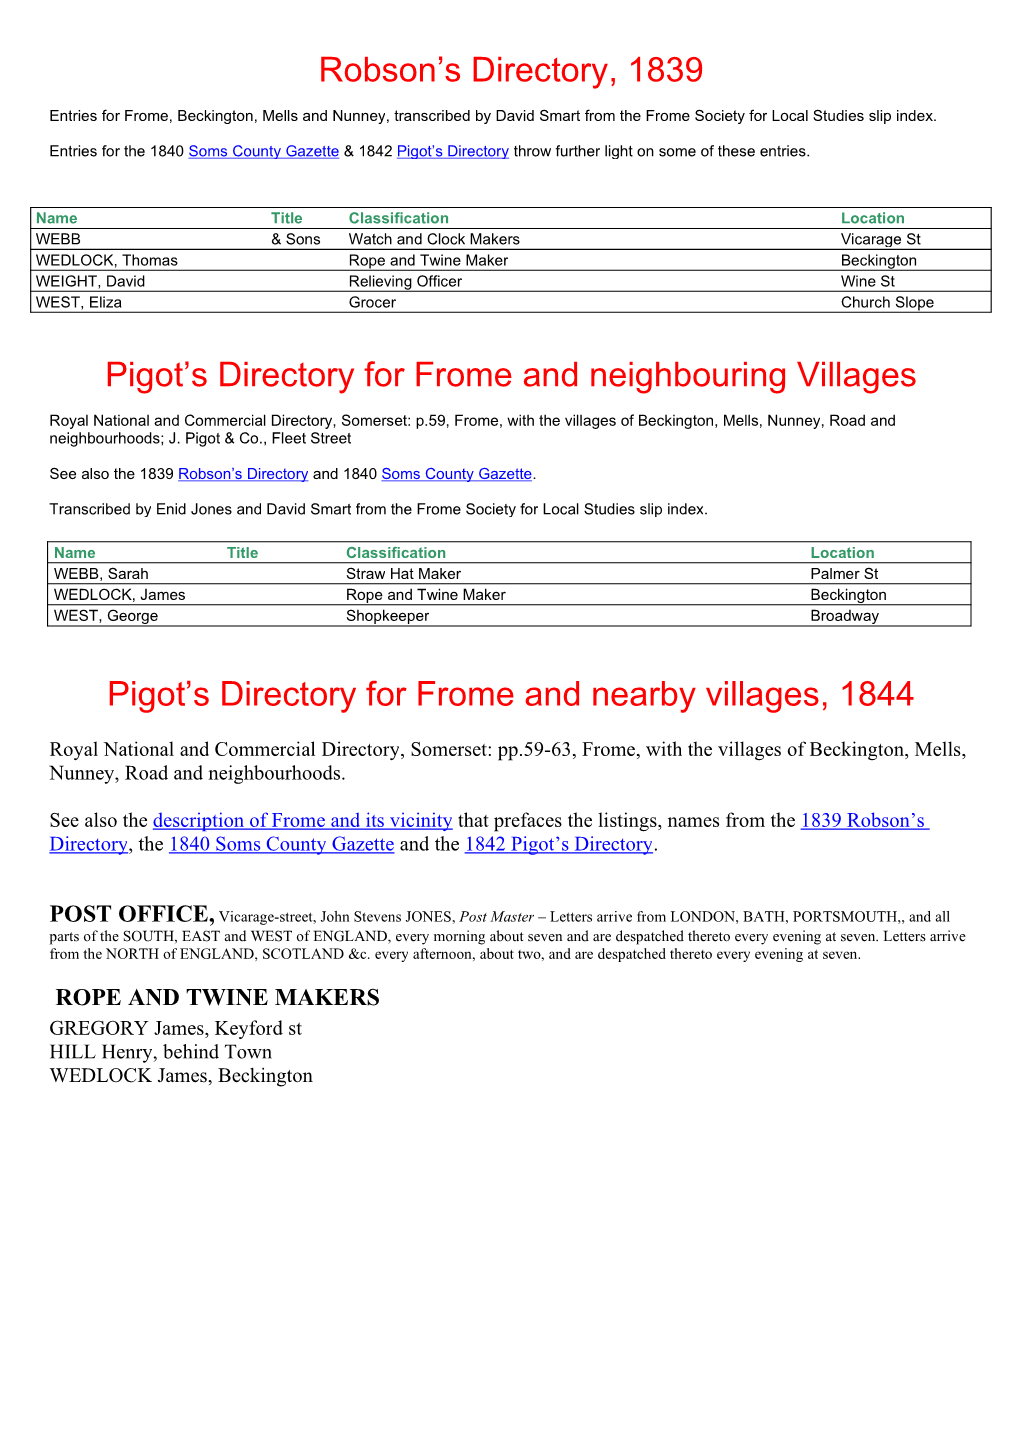 Robson's Directory, 1839 Pigot's Directory for Frome And